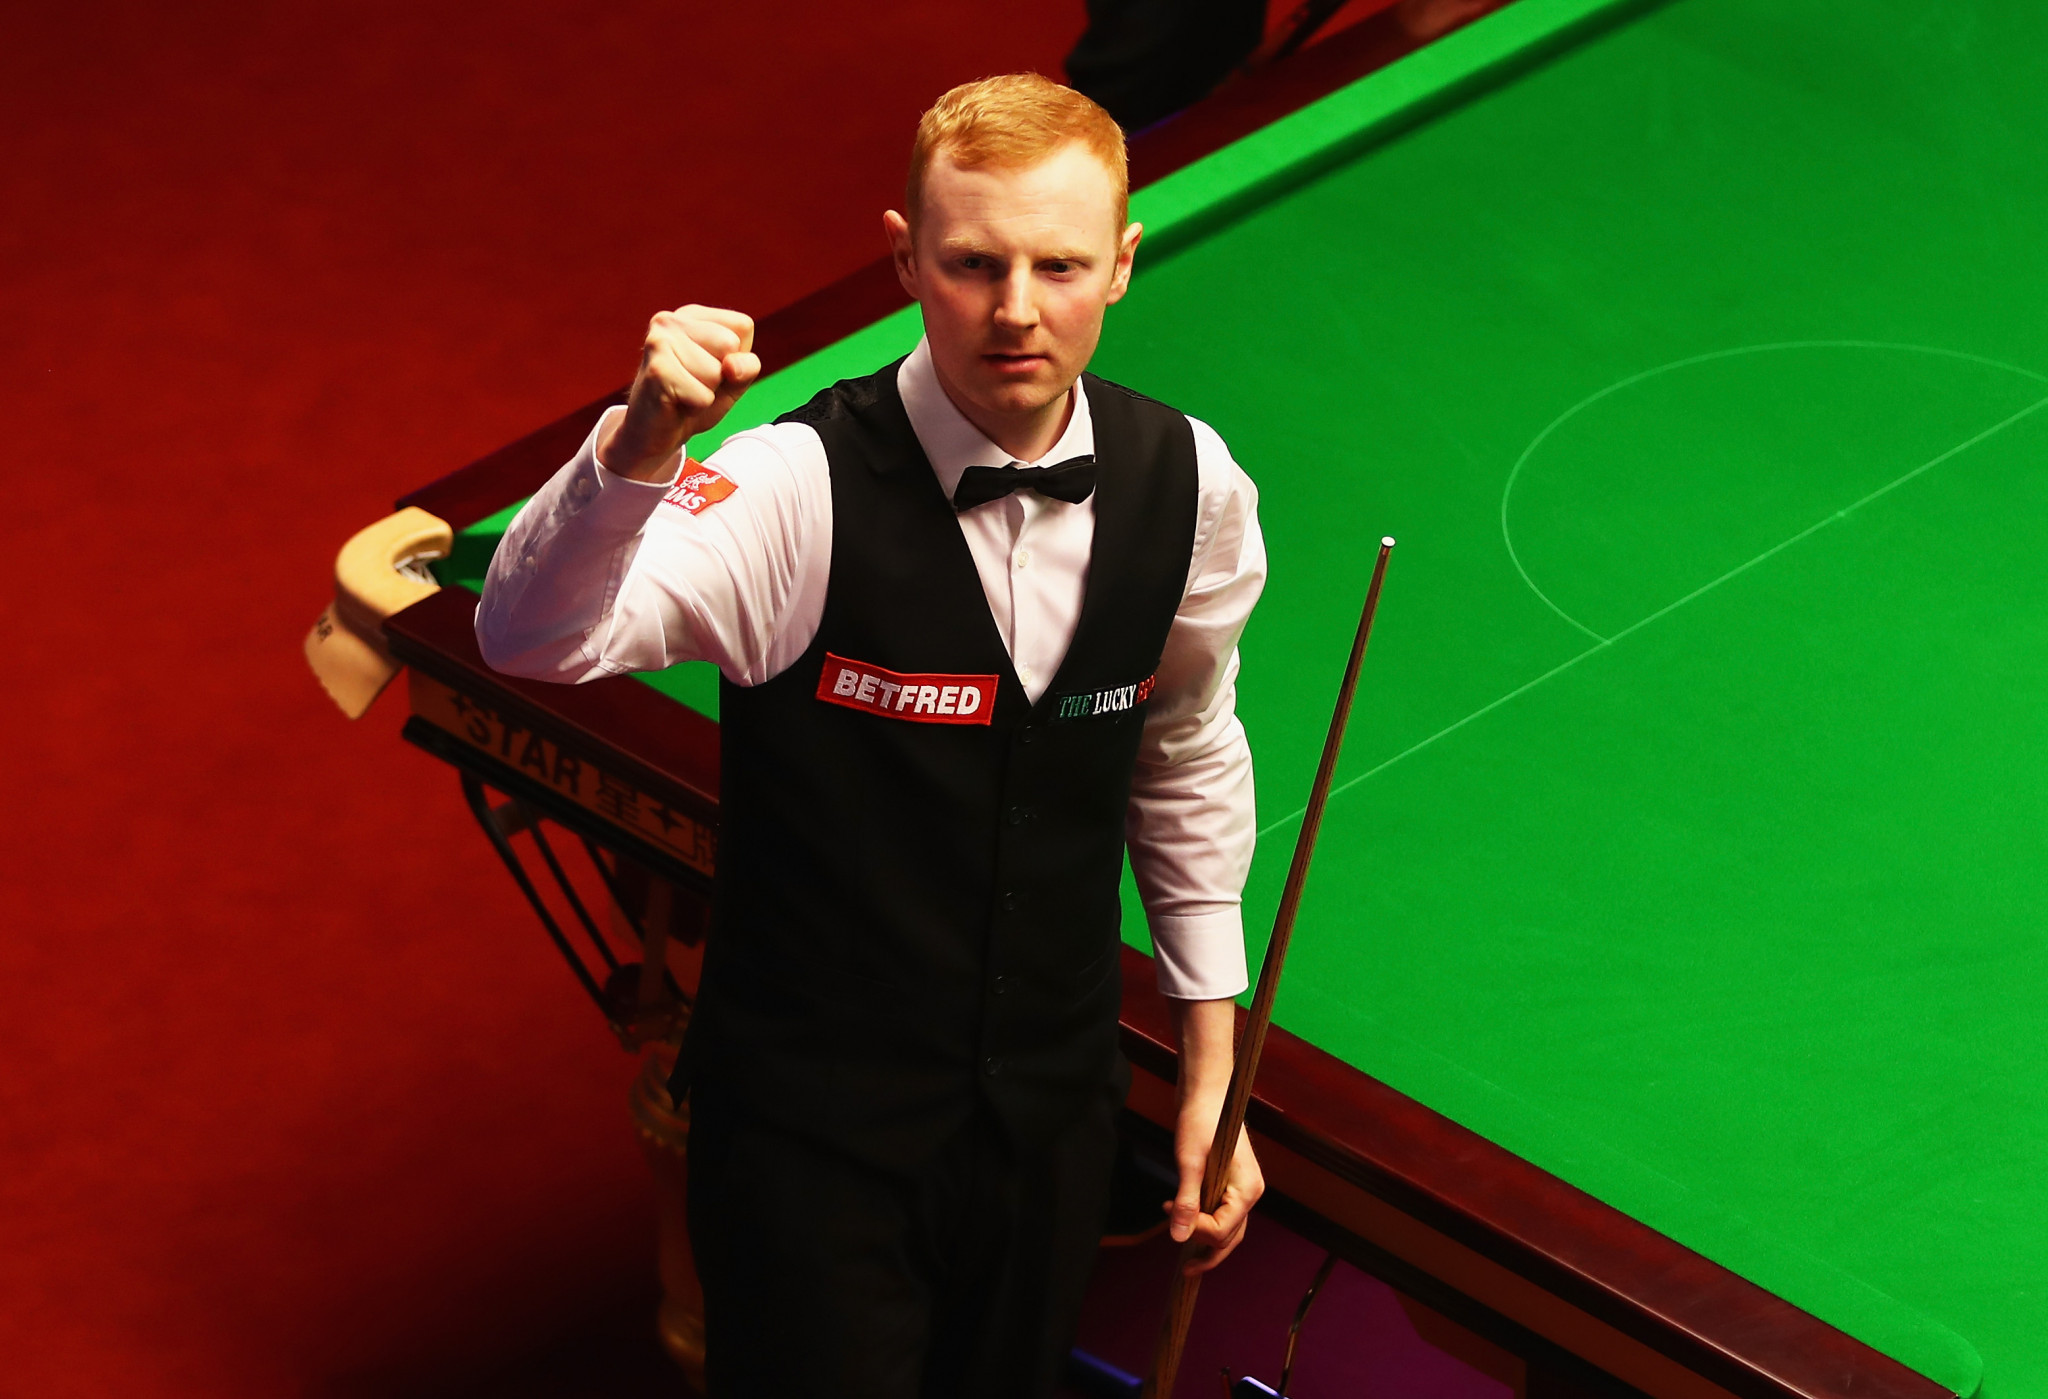 McGill produces impressive comeback to reach second round of World Snooker Championships